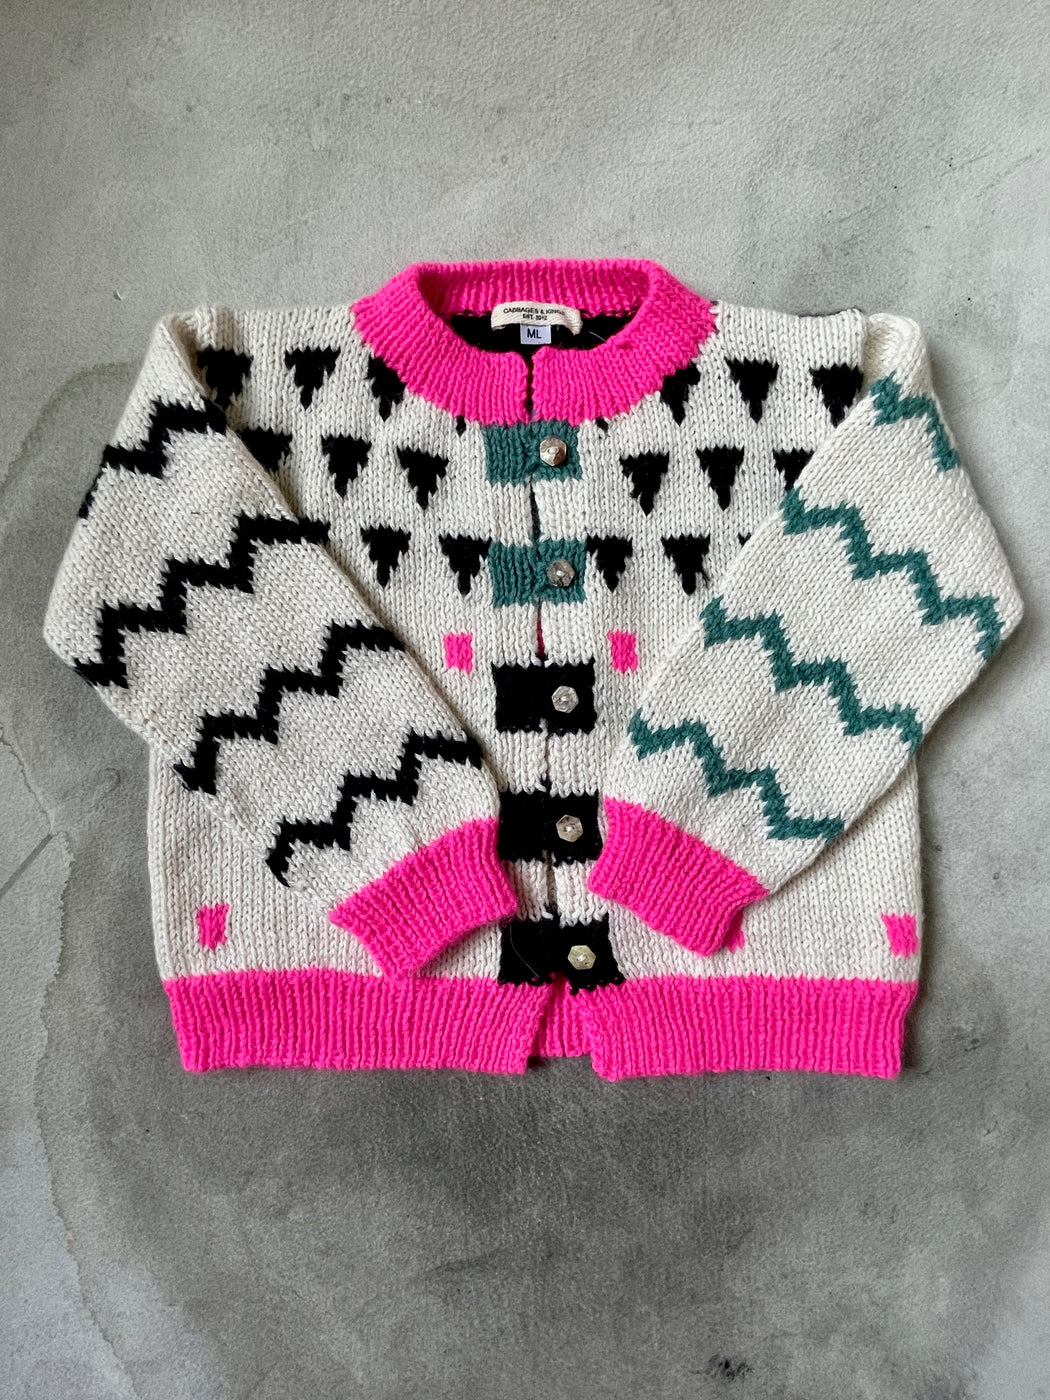 Cabbages & Kings "Museum" Sweater (3-4 years)